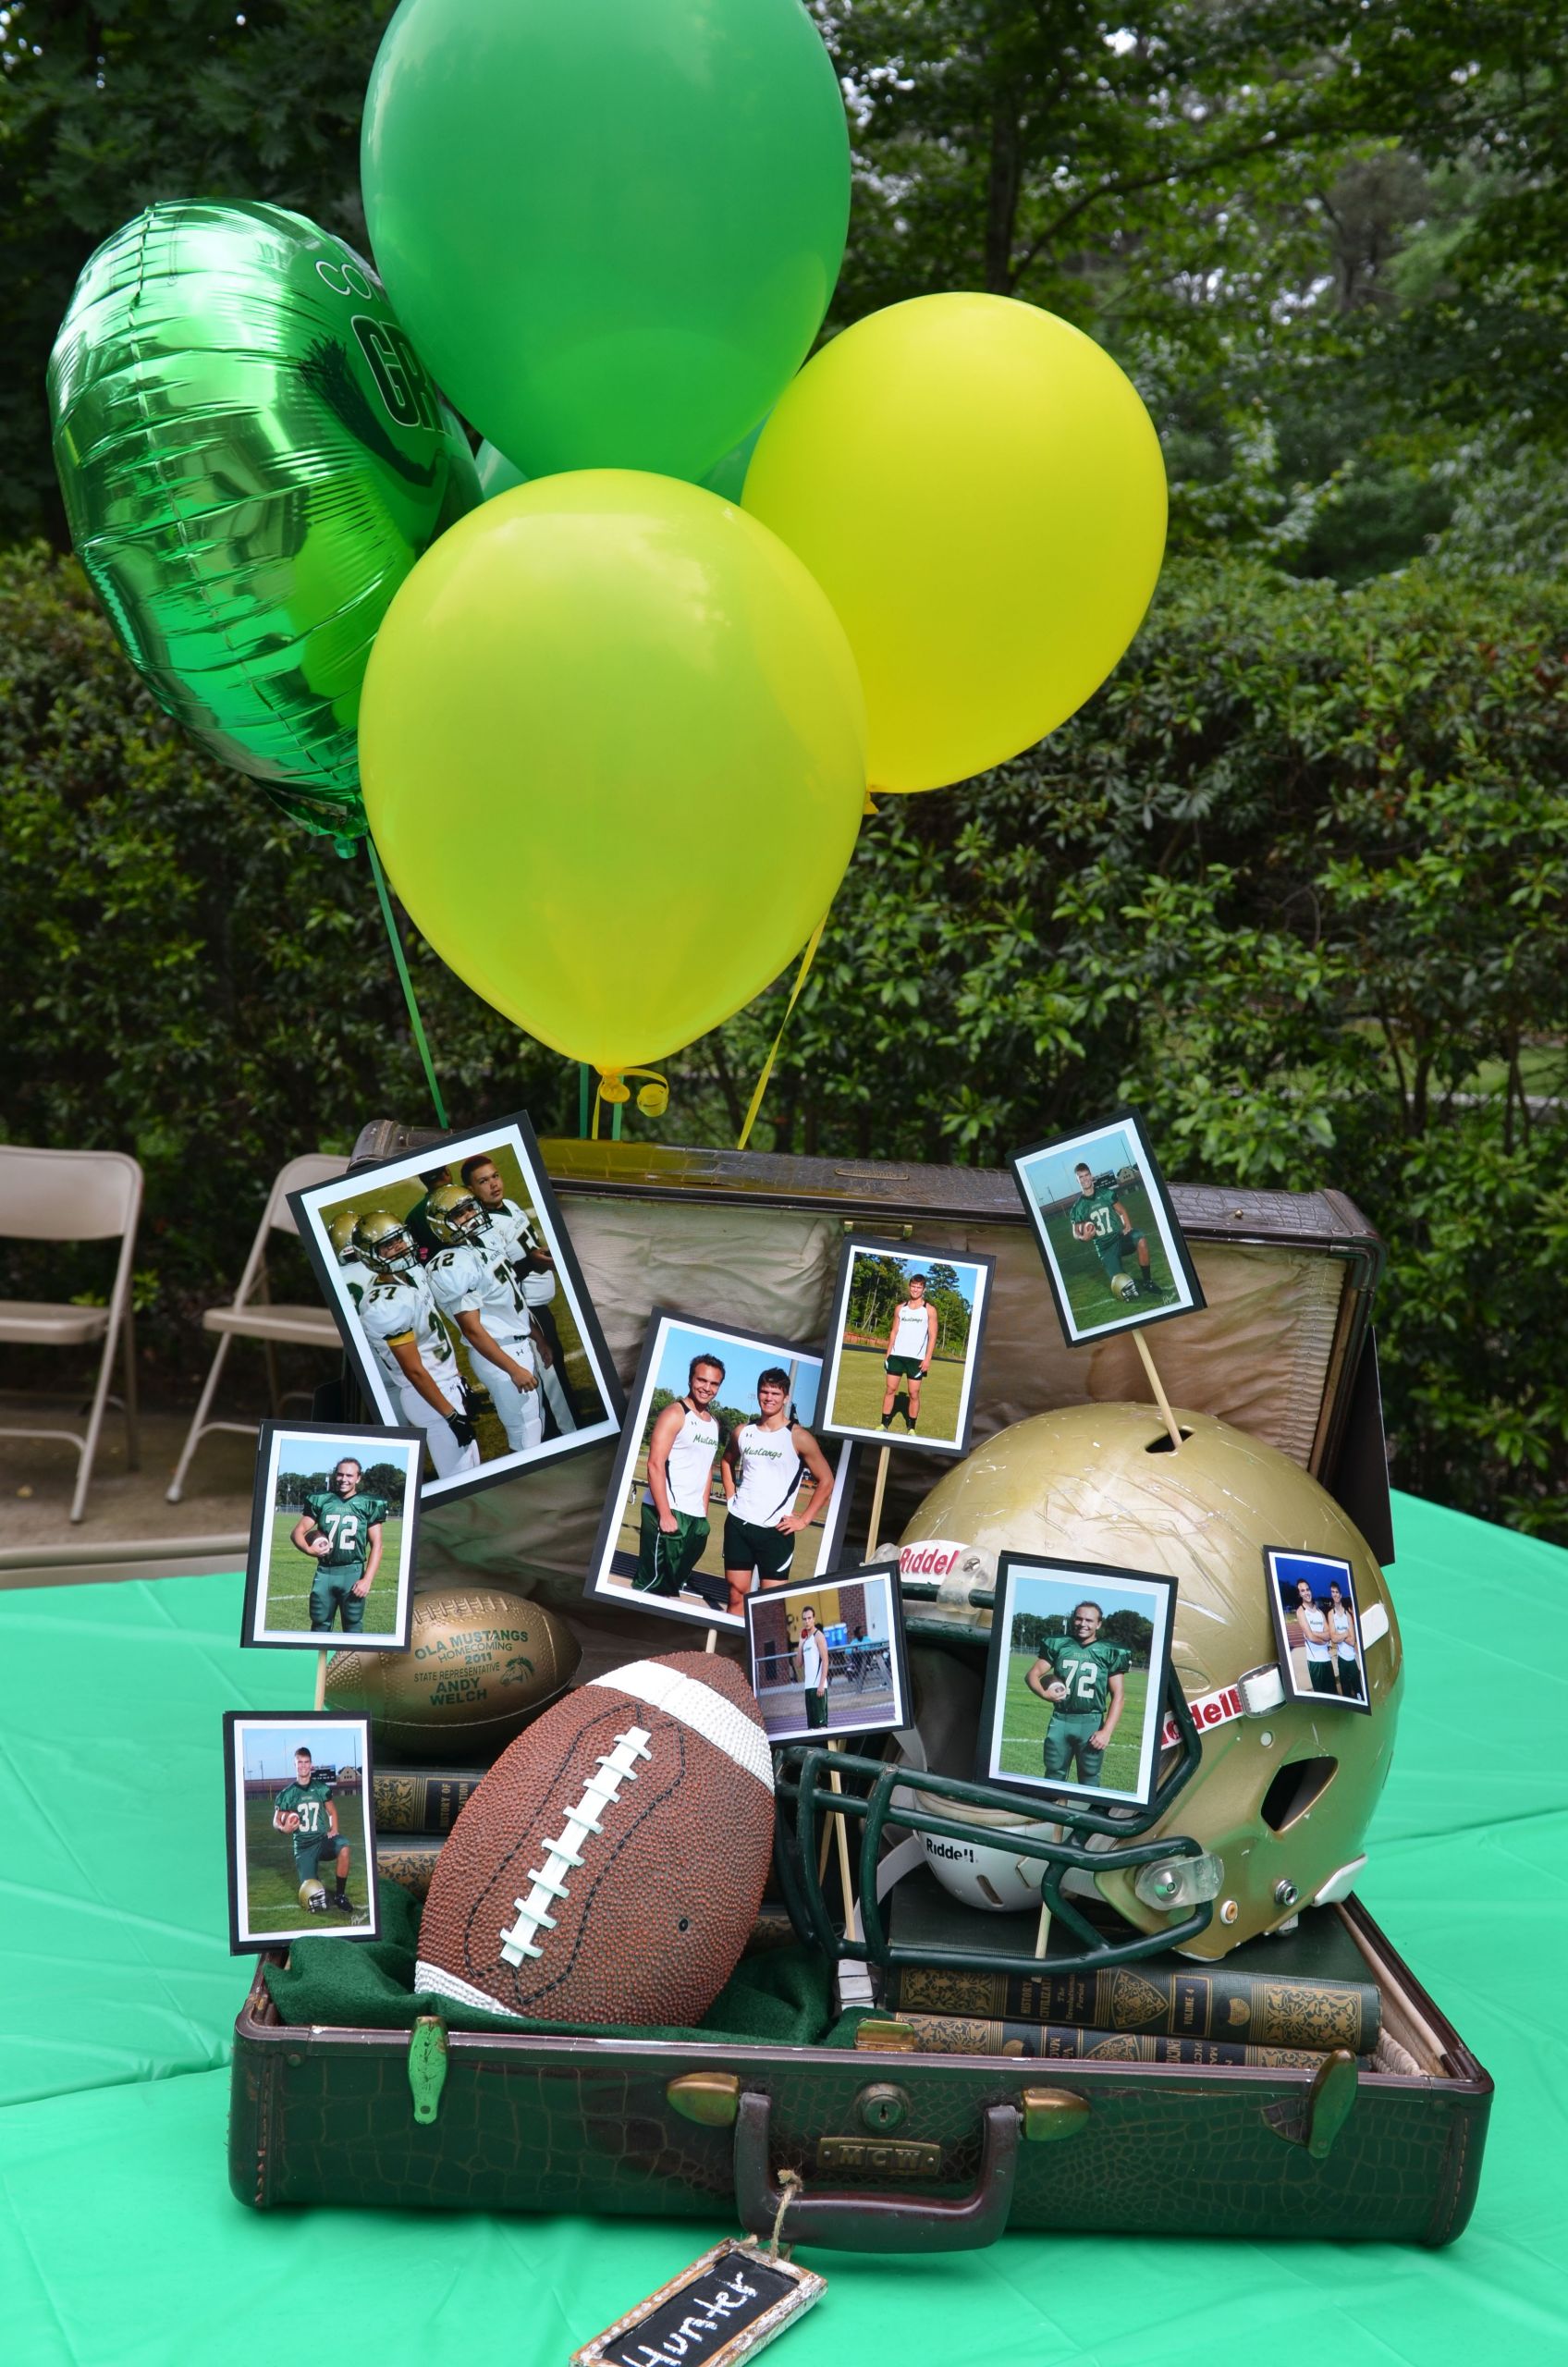 Graduation Party Gift Table Ideas
 30 INSANELY AWESOME GRADUATION PARTY IDEAS TO DIY RIGHT